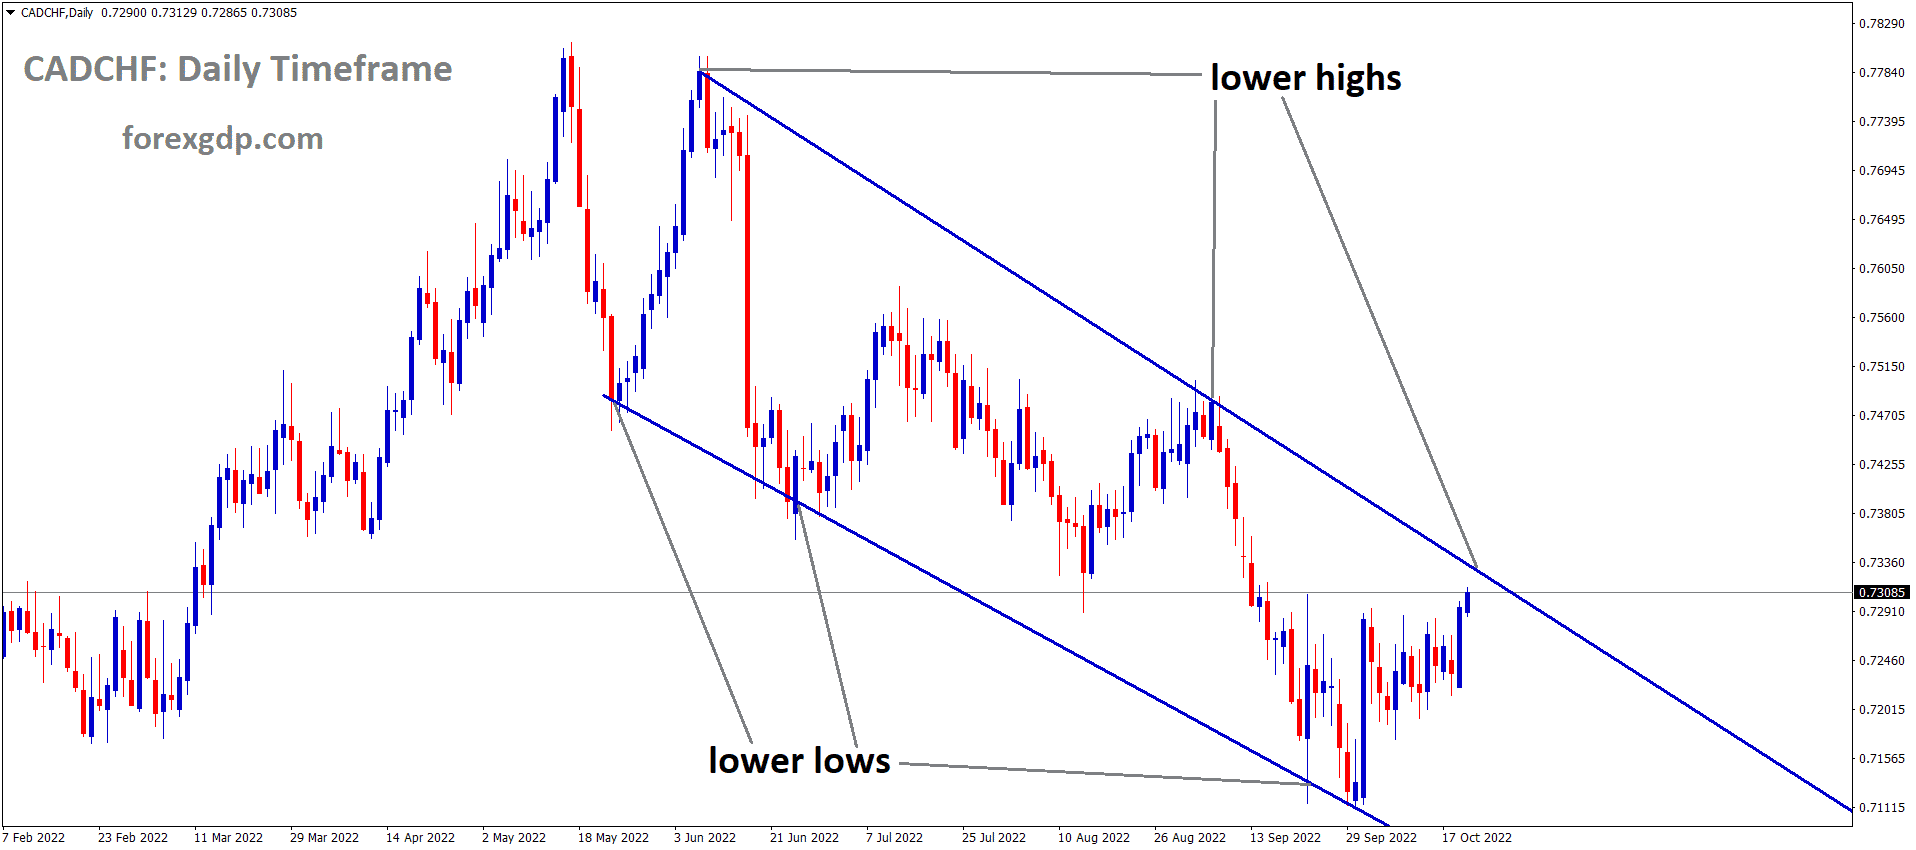 CADCHF is moving in the Descending channel and the market has reached the lower high area of the channel 1